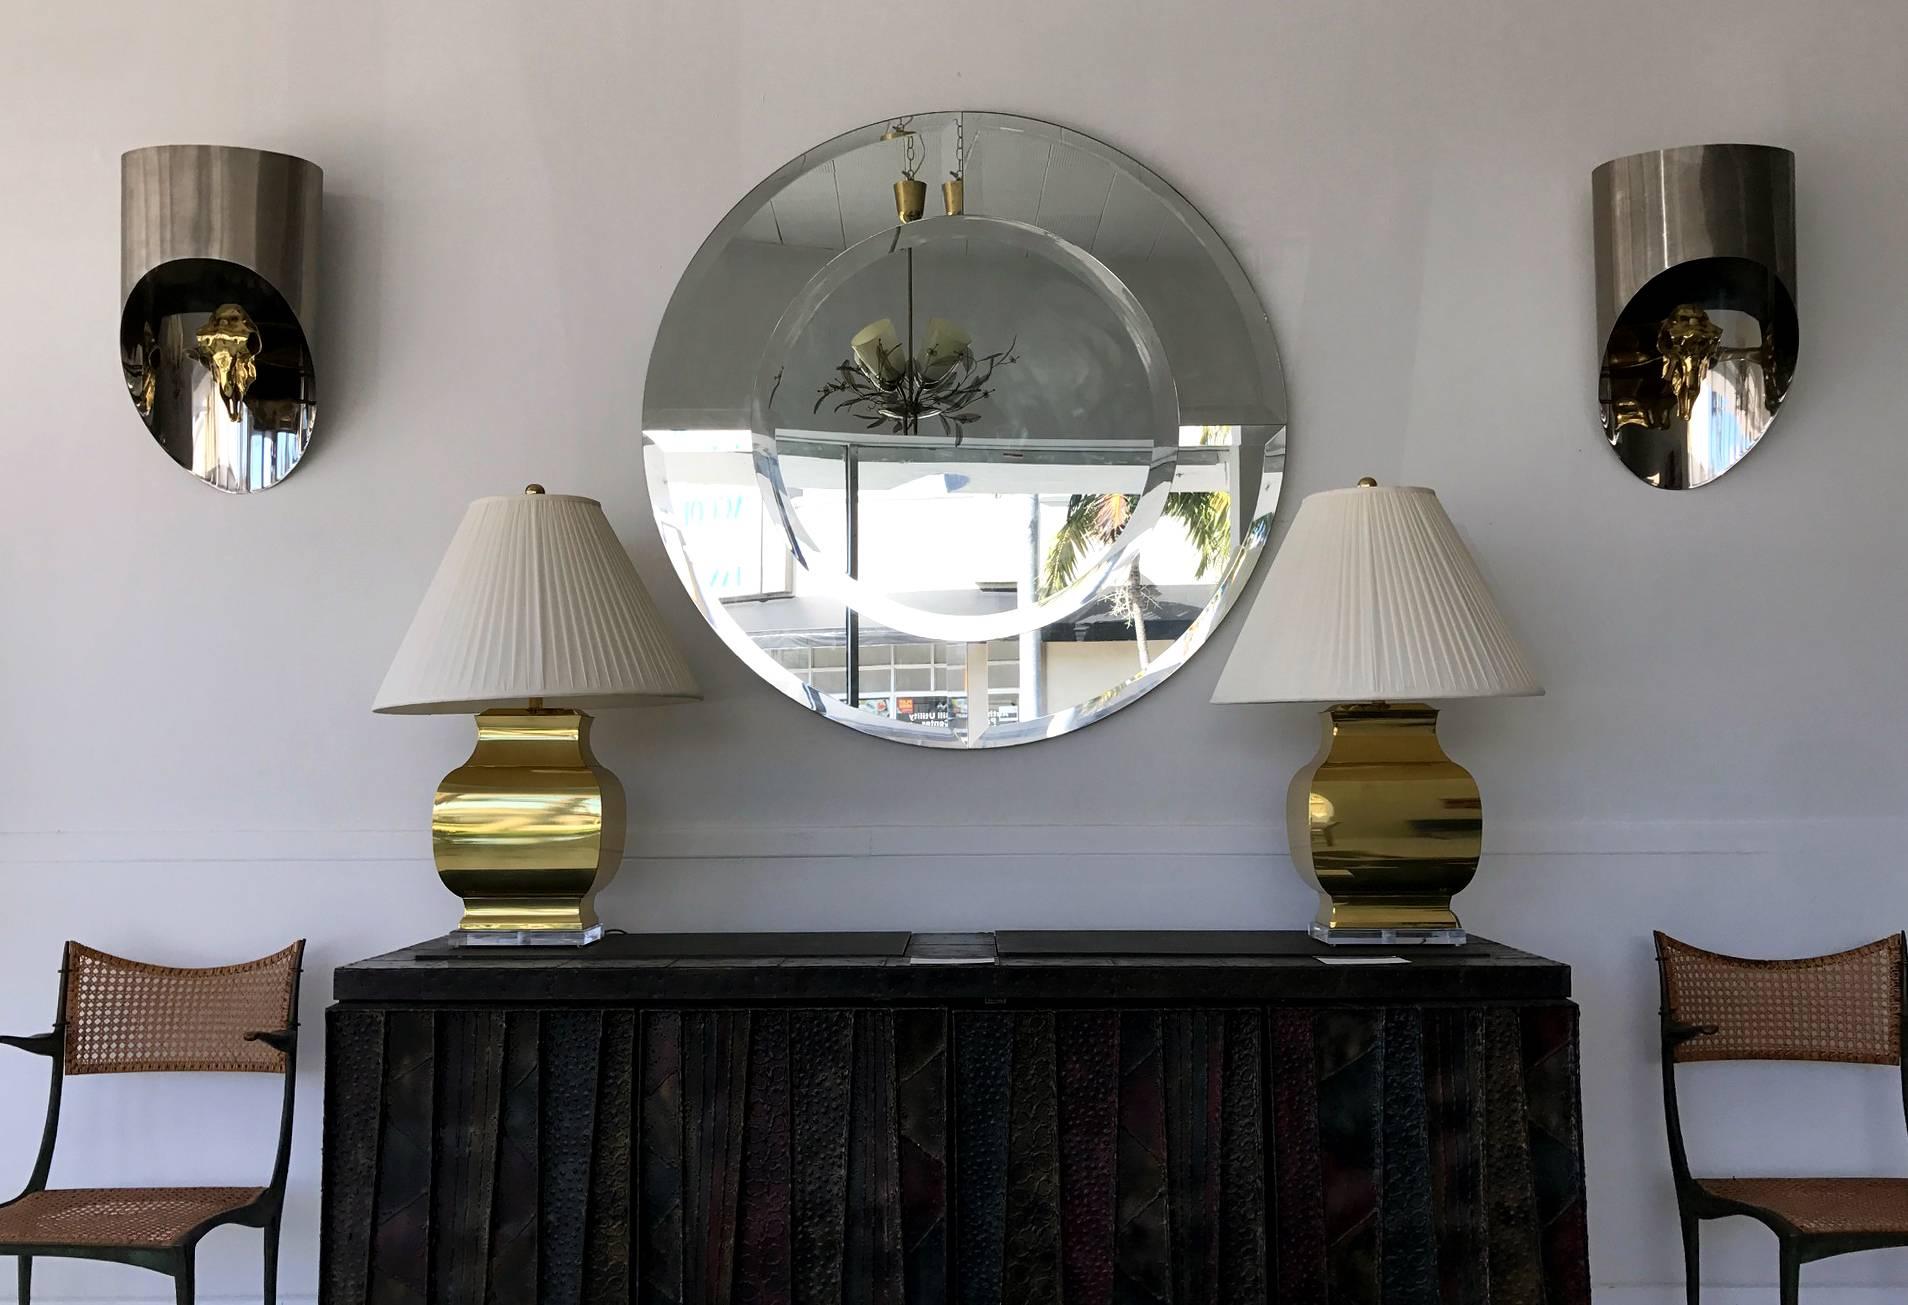 Impressive in size, striking in appearance, this "Saturn" mirror was designed and produced by Karl Springer during his revival of Glamor Interior in the 1970s and 1980s. The beveled and layered construction evokes a sense of aesthetic of